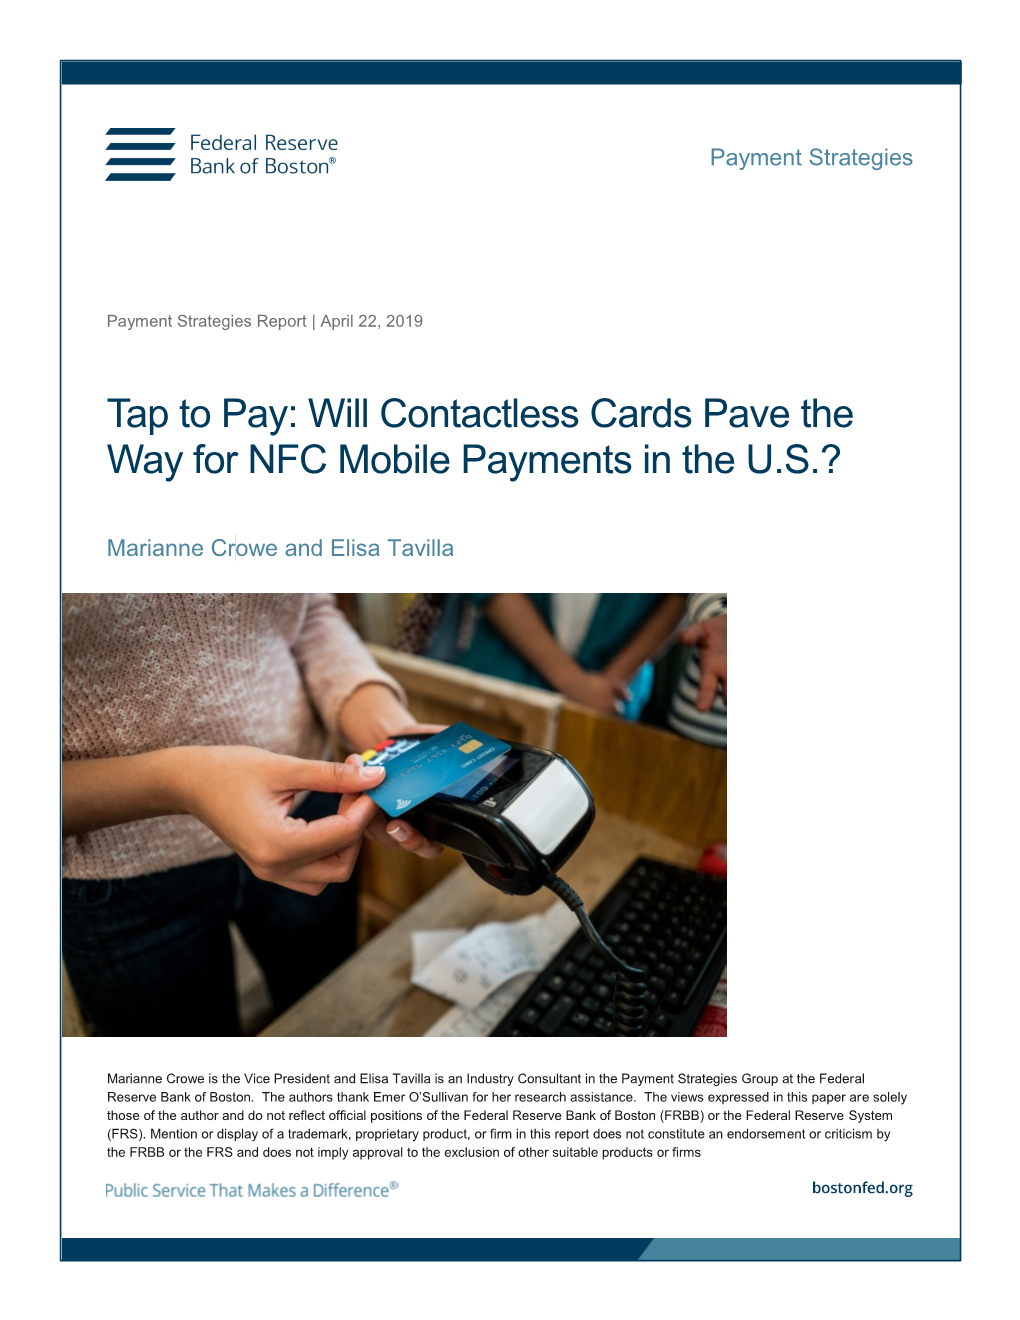 Will Contactless Cards Pave the Way for NFC Mobile Payments in the U.S.?